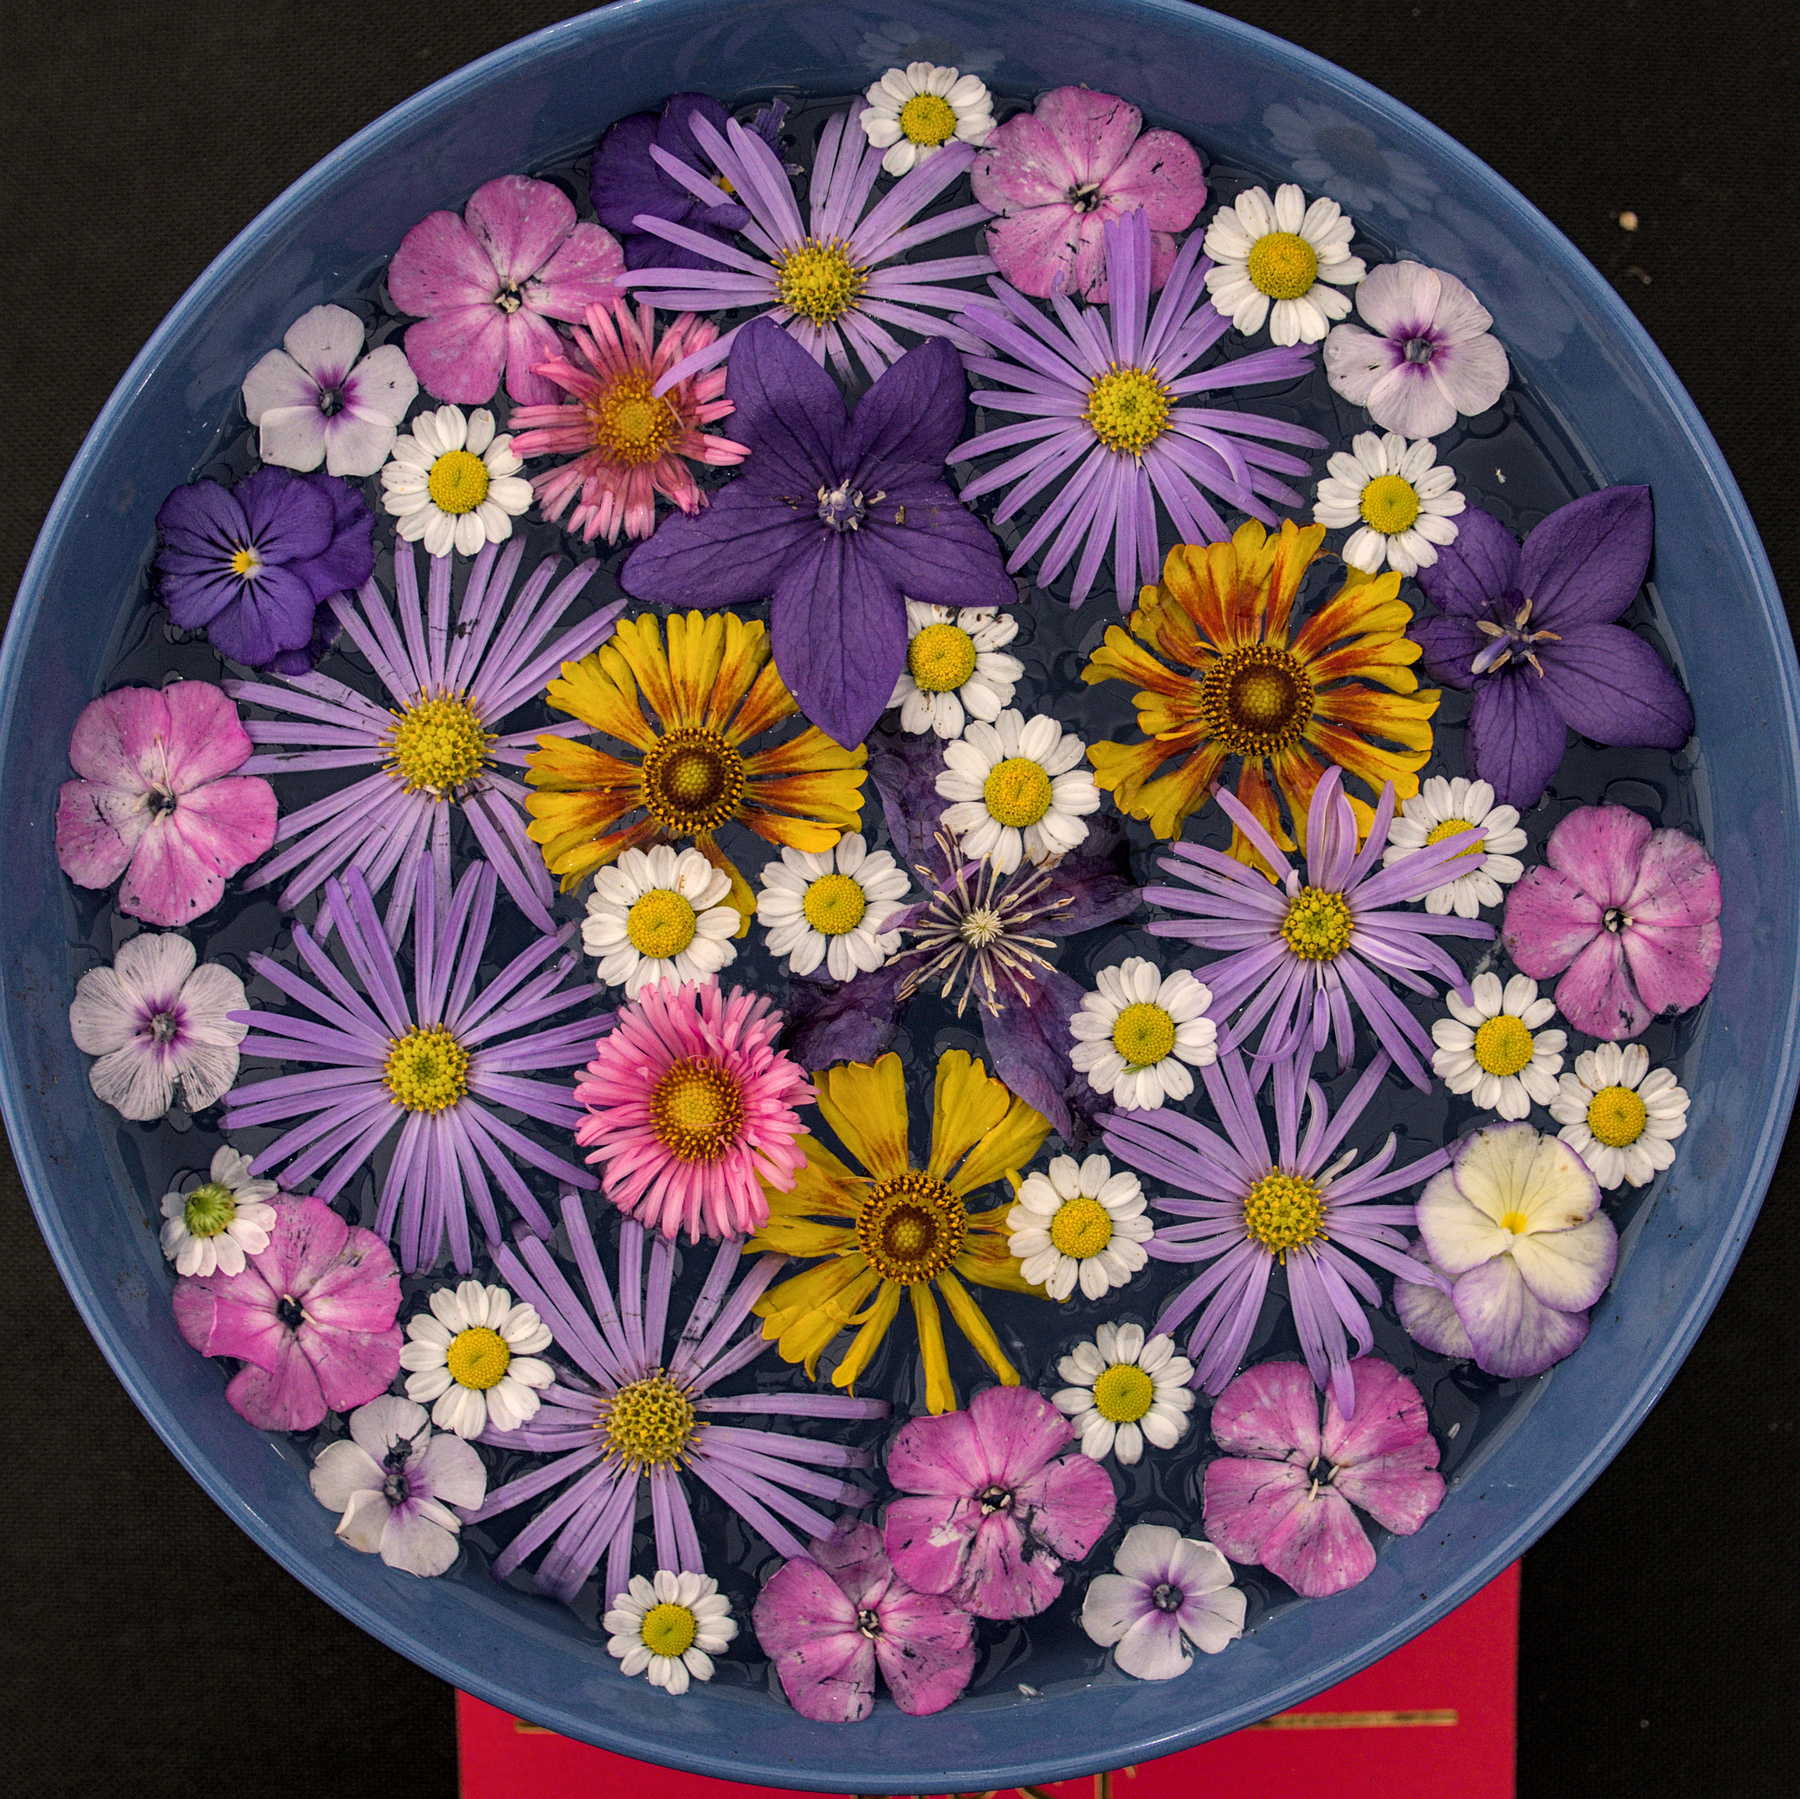 An arrangement of flower heads floating in a bowl of water from above. The flowers are mainly pink and purple, with some yellows to accent